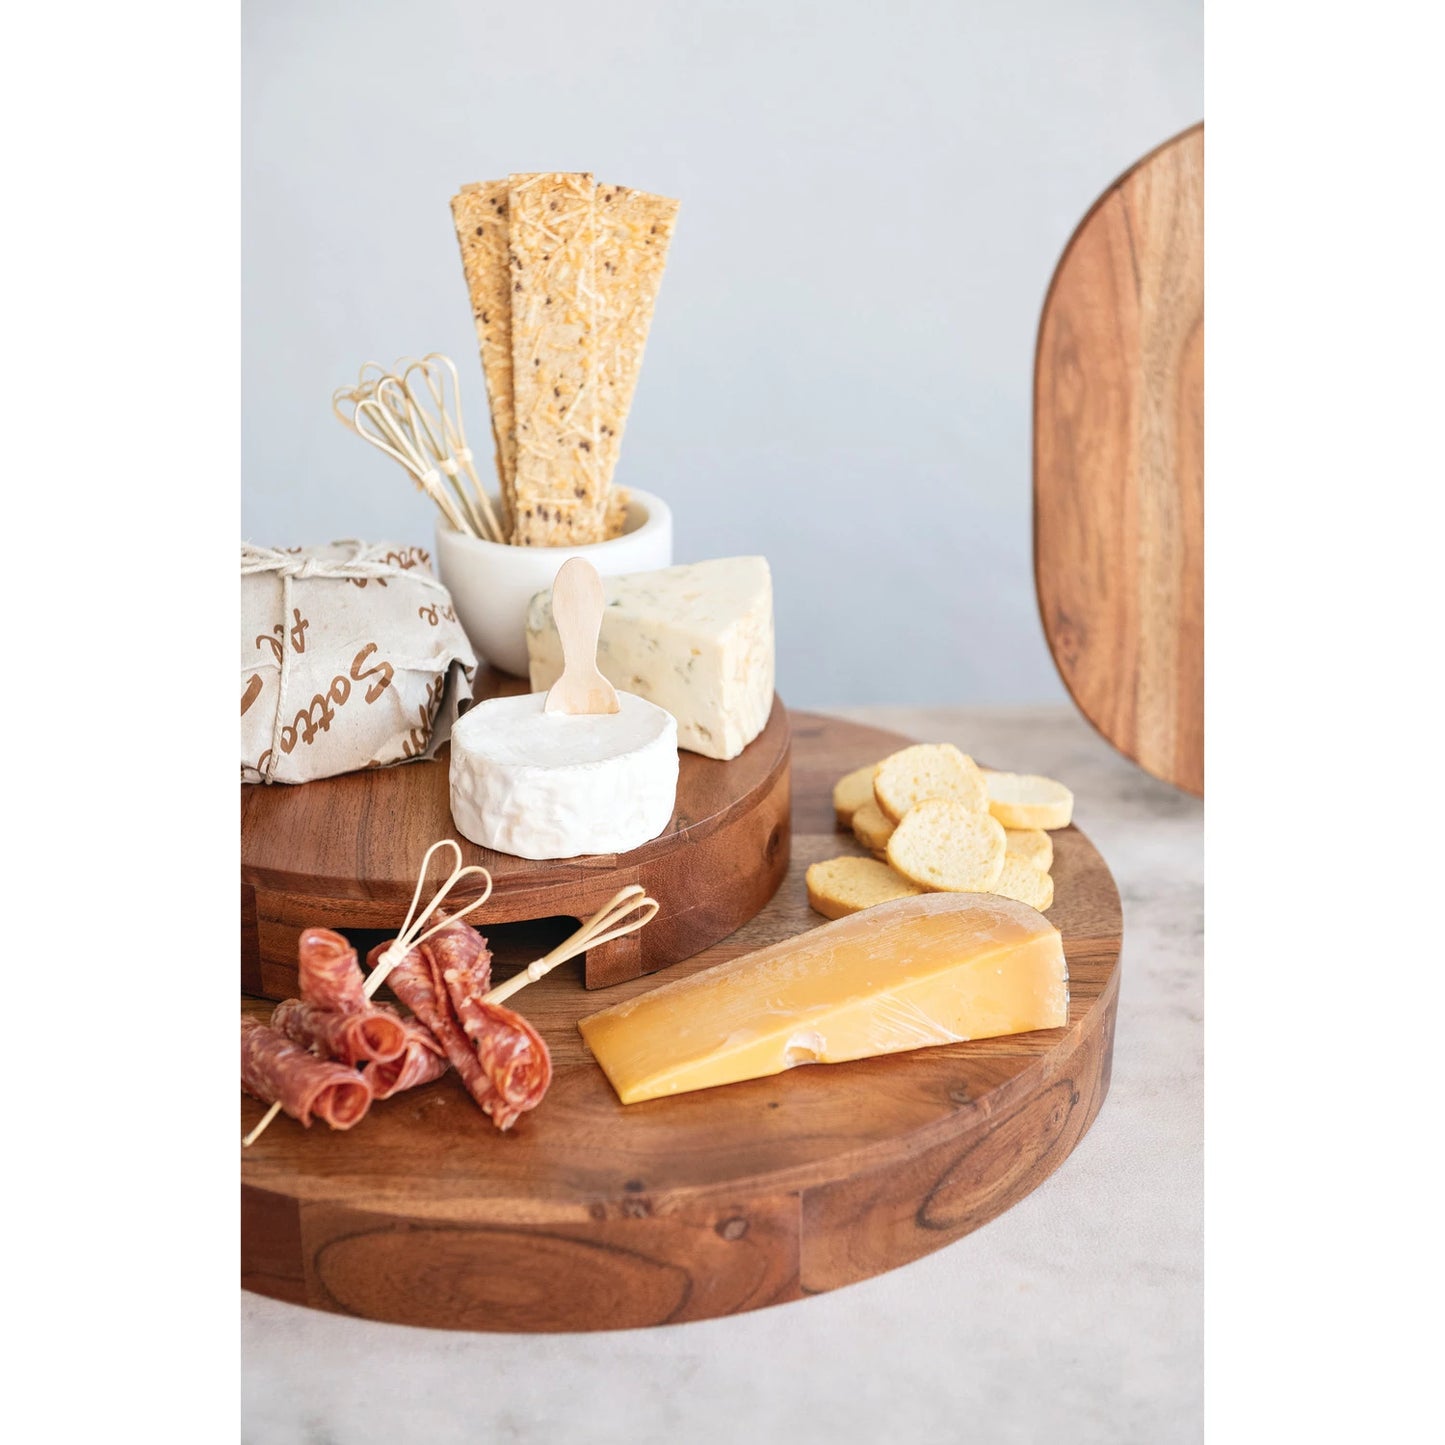 2 sizes of round wood boards stacked with cheeses and meats arranged on them.